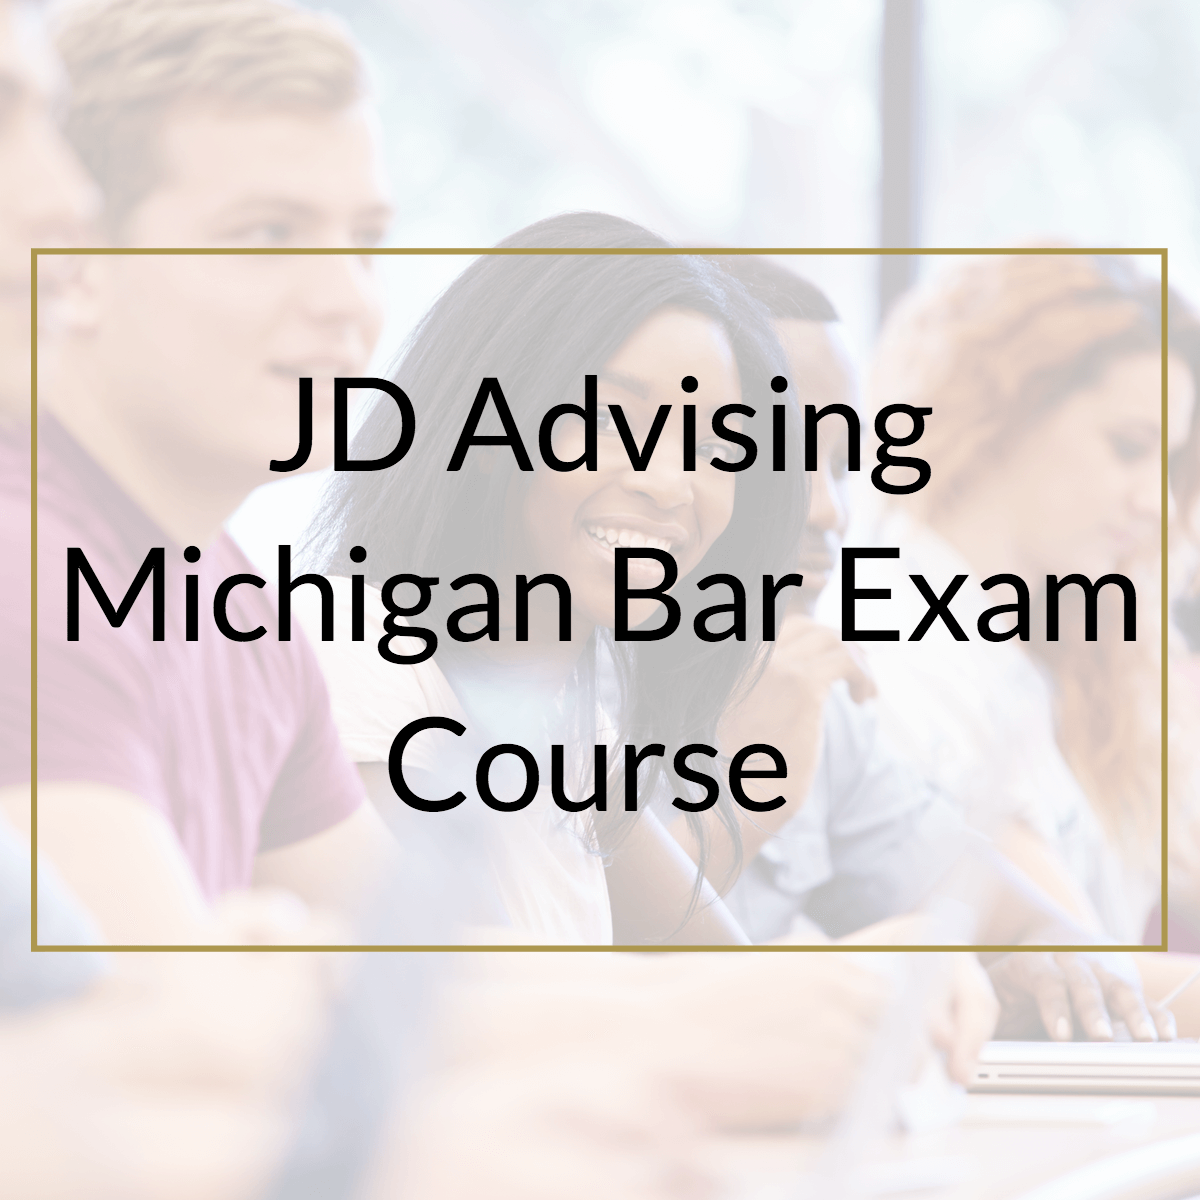 The best Michigan Bar Exam Course—by JD Advising